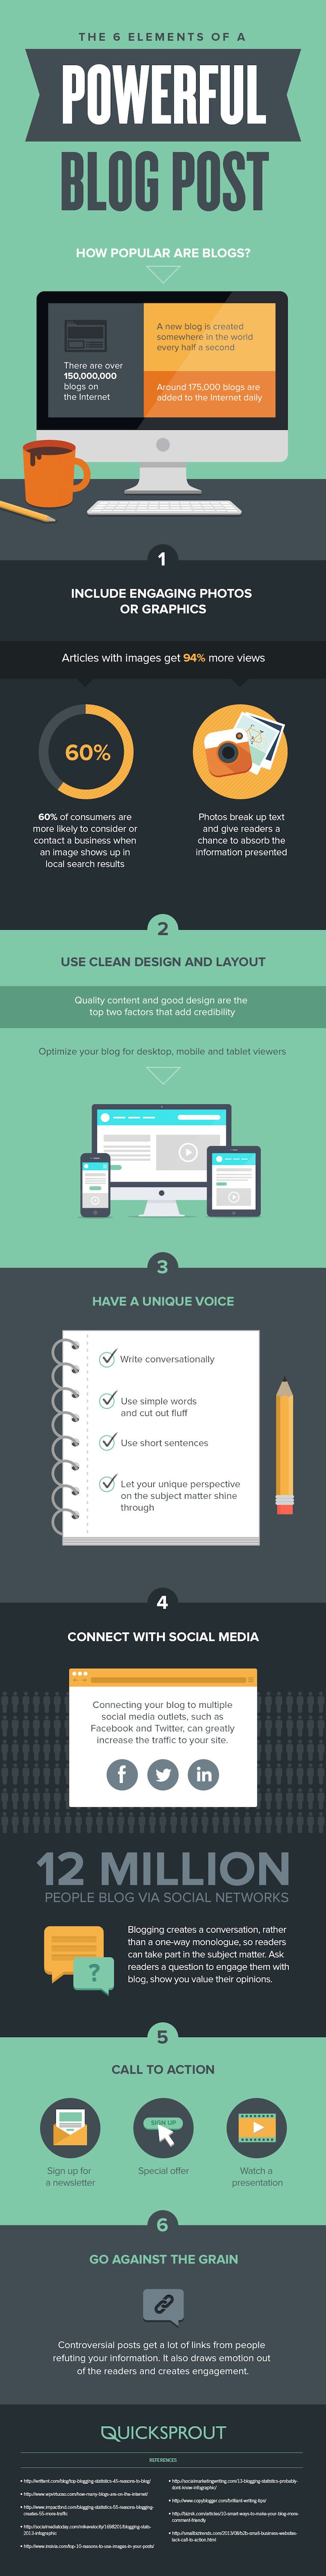 this infographic shows 6 parts of an amazing blog post